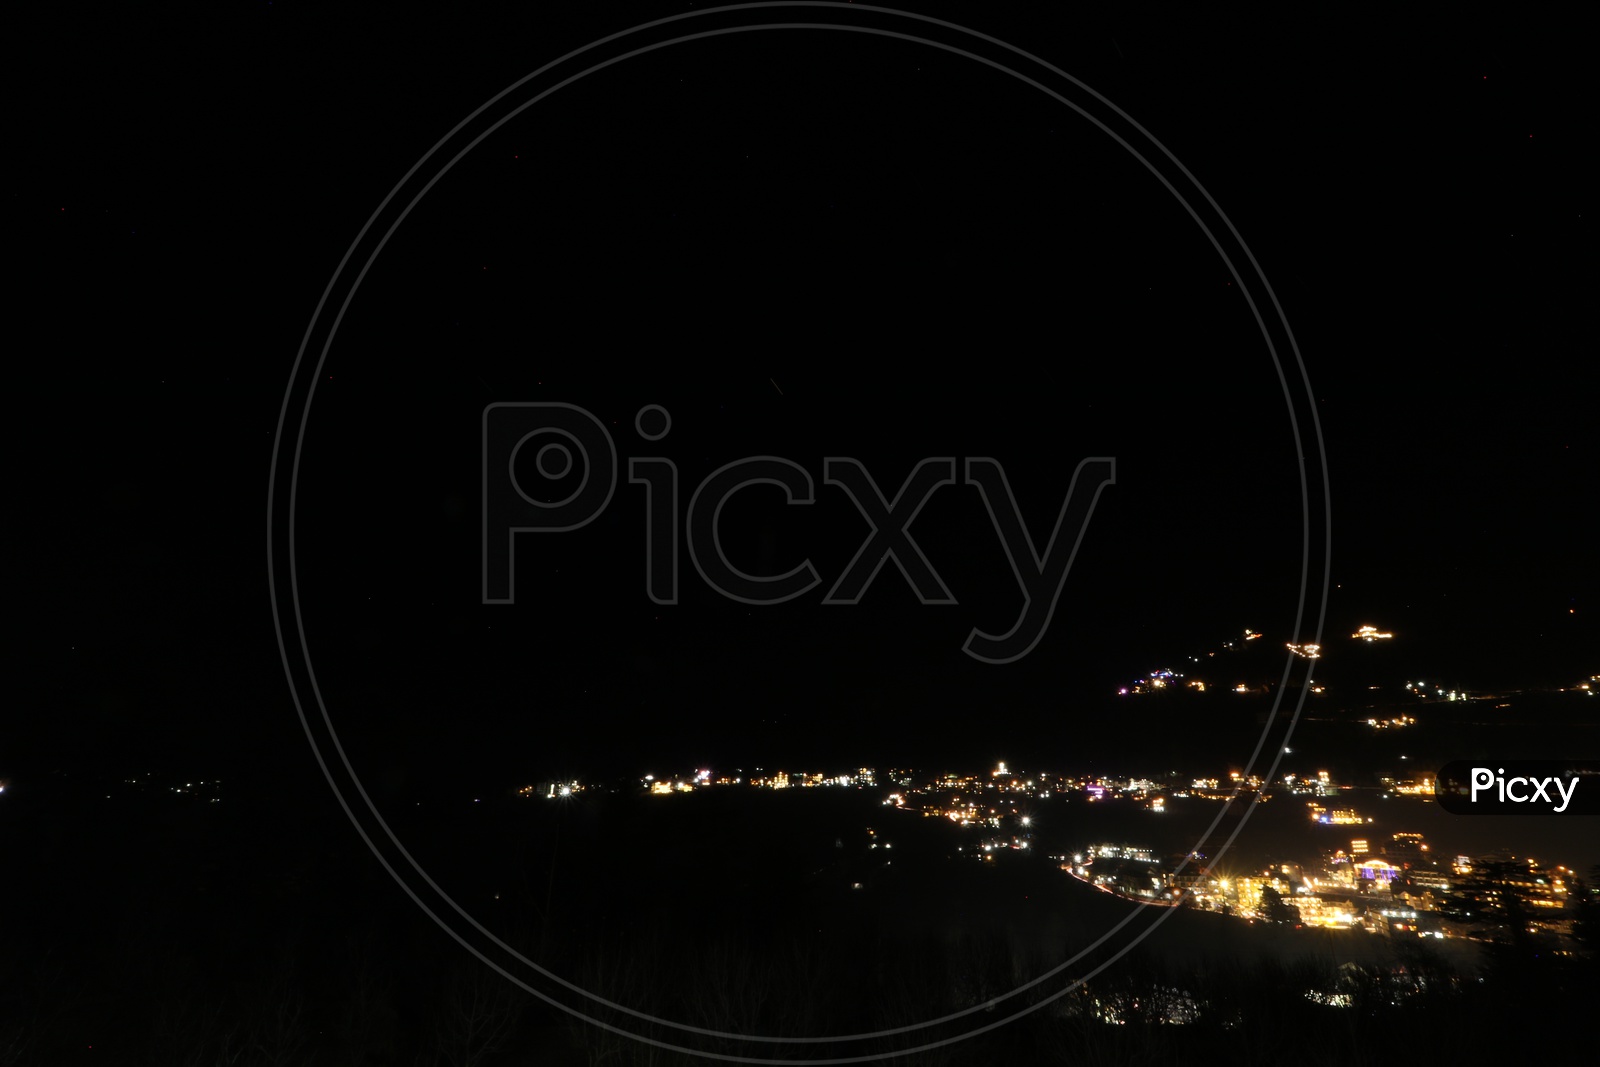 Night view of the town in hills